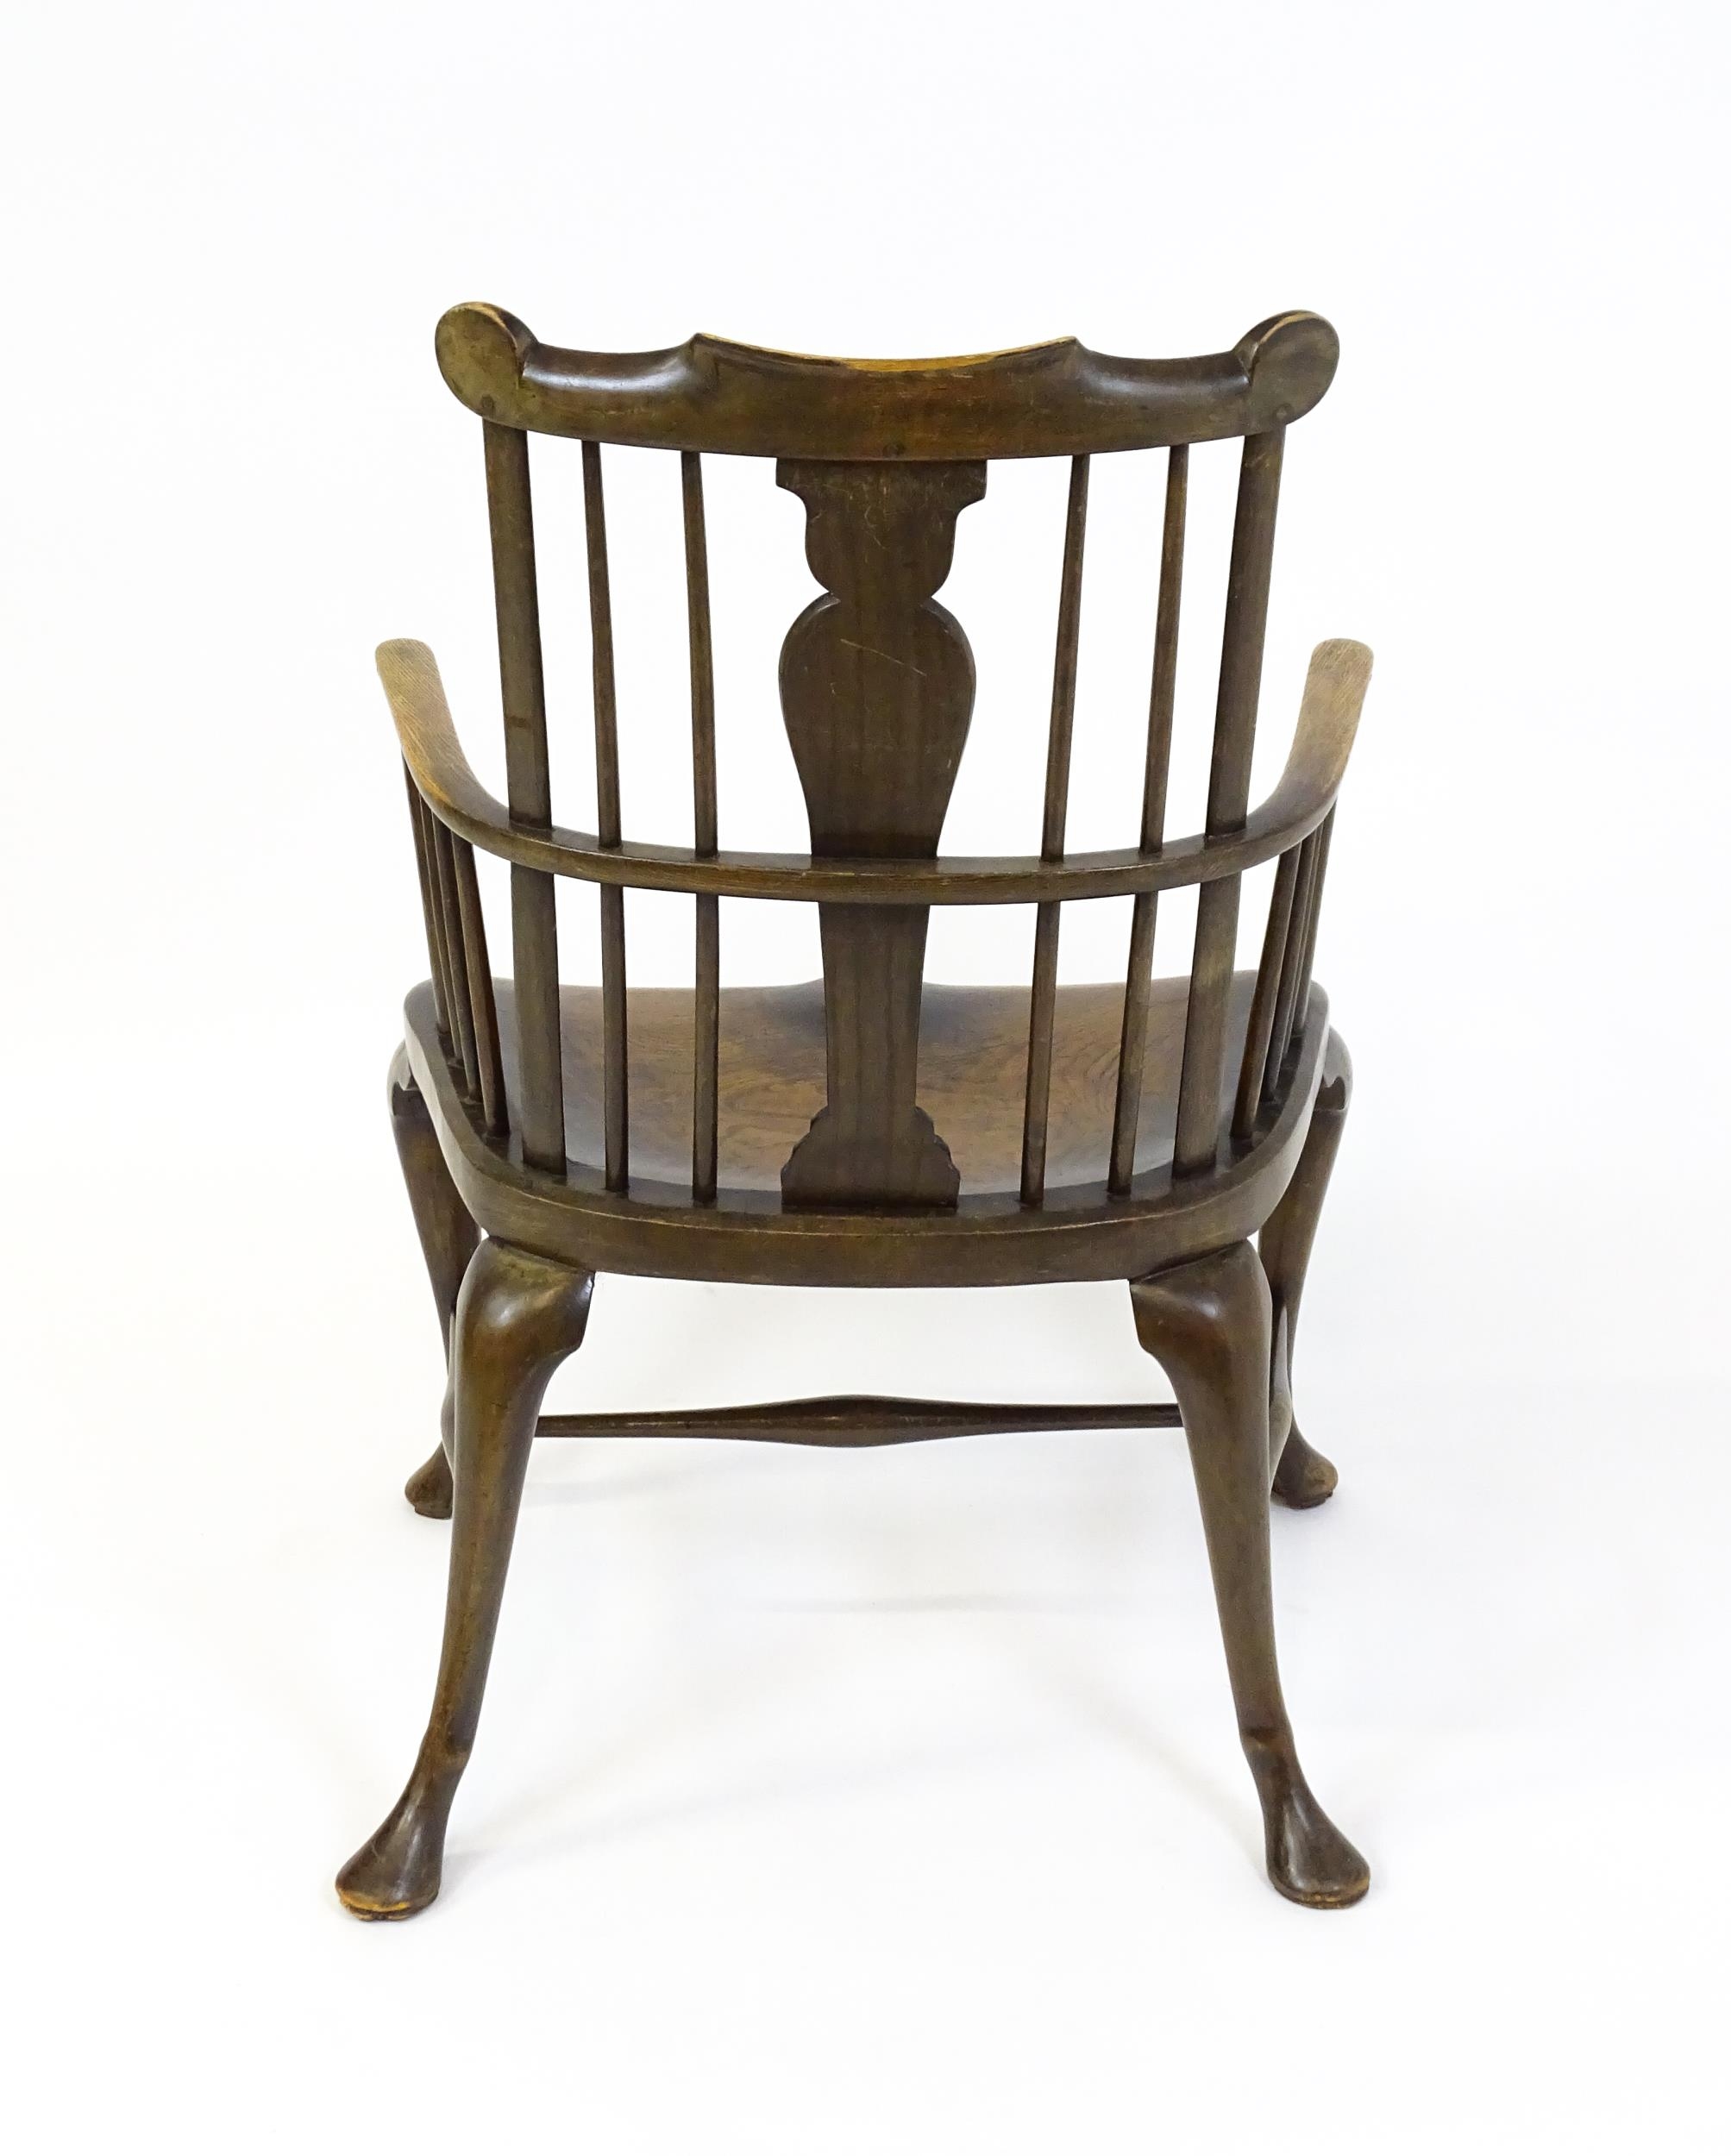 A late 19thC / early 20thC comb back Windsor chair with a vase shaped back splat and an unusually - Image 2 of 6